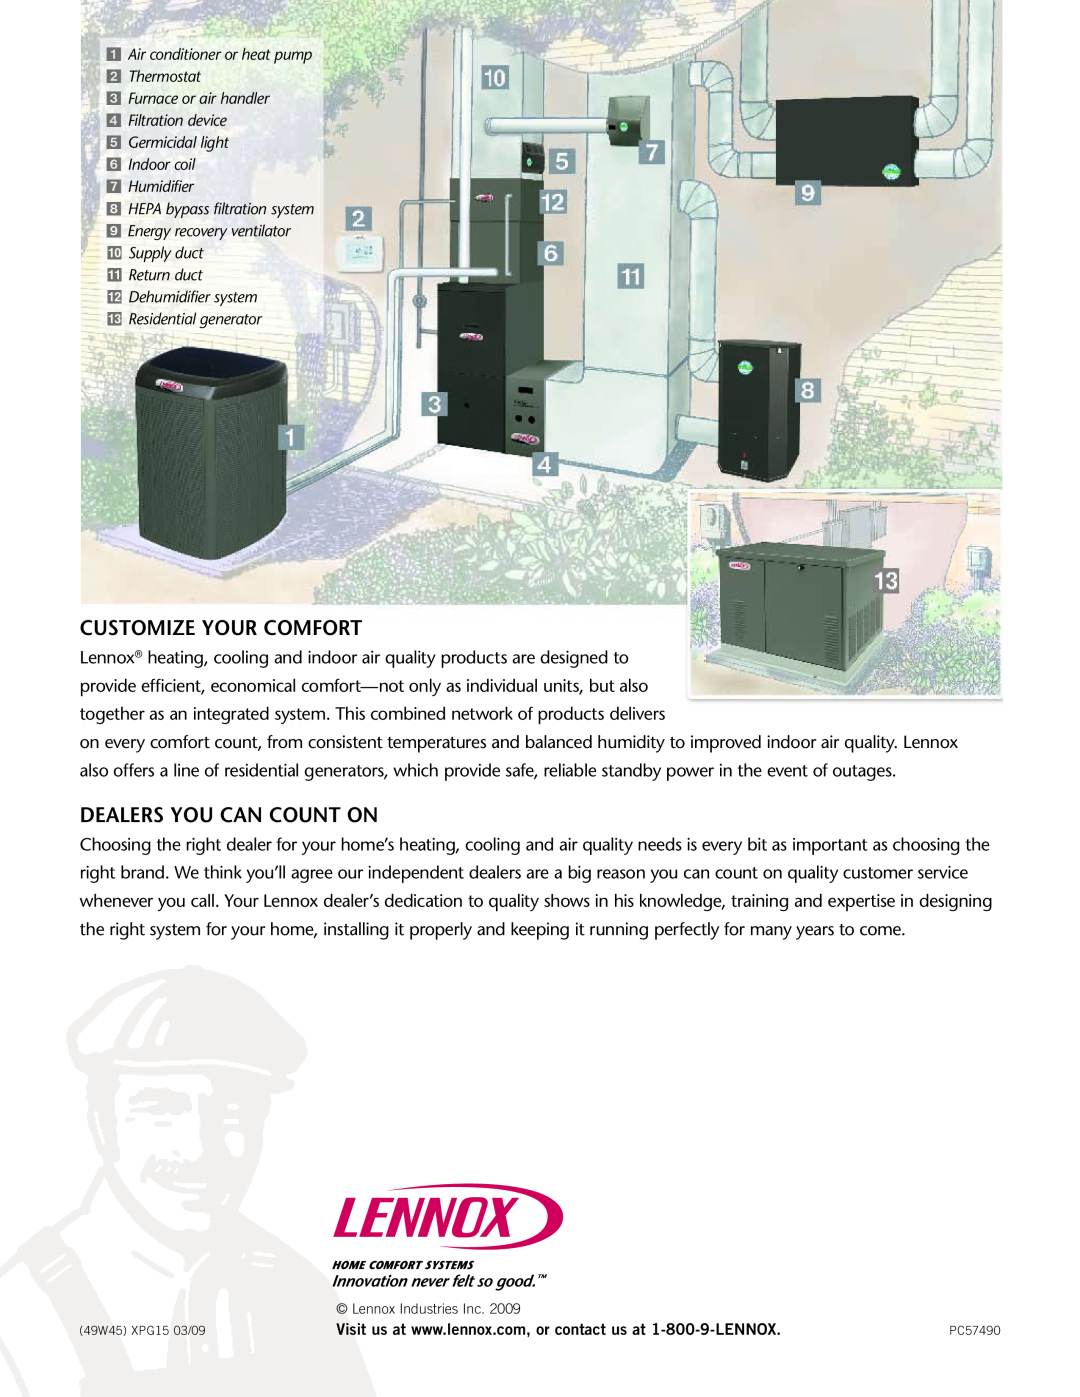 Lennox International Inc XPG15 manual customize your comfort, Dealers You Can Count On, Residential generator 